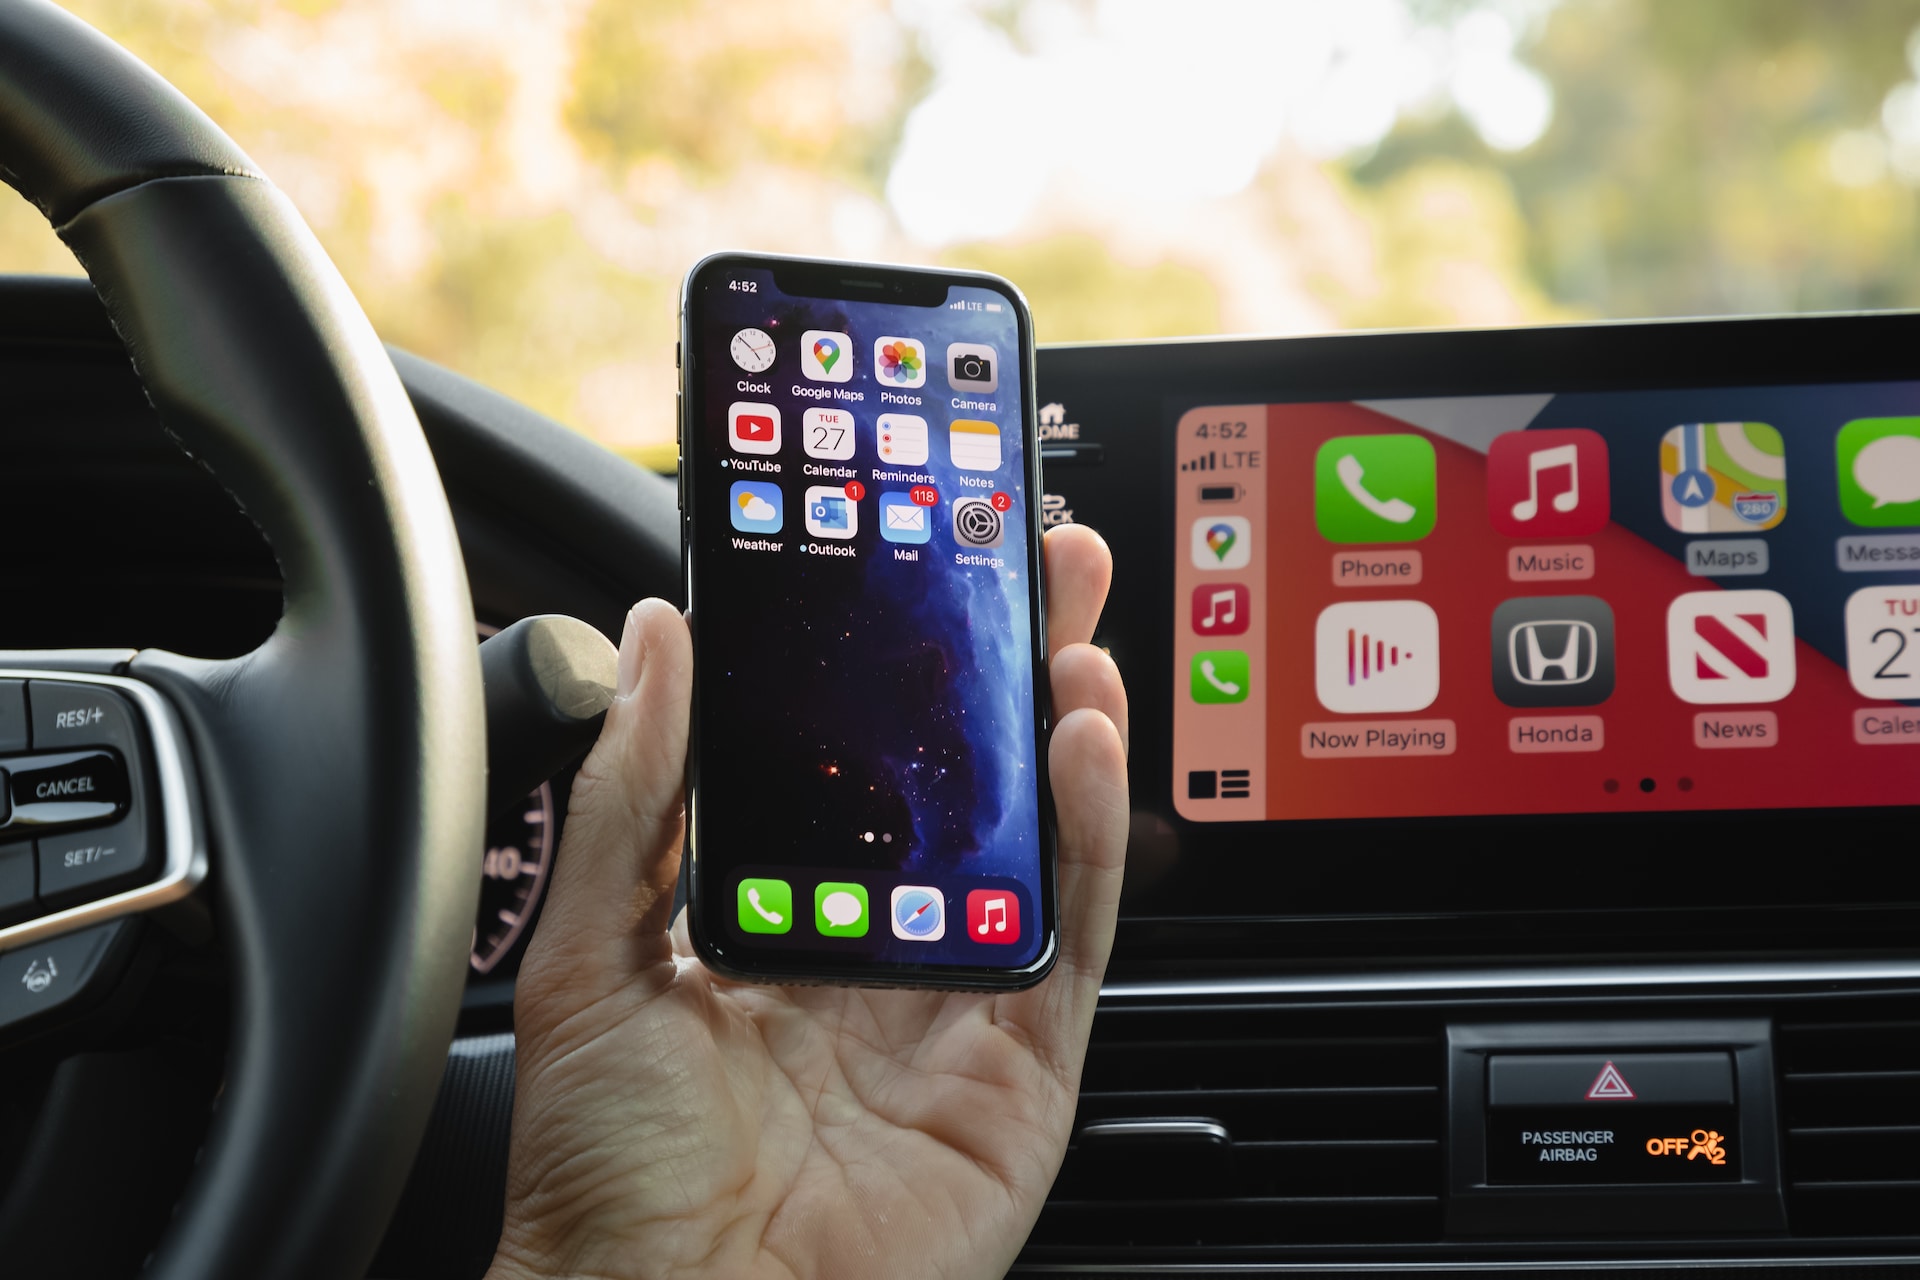 In-Car Audio: Pairing Your Phone With Car Stereo Via Bluetooth